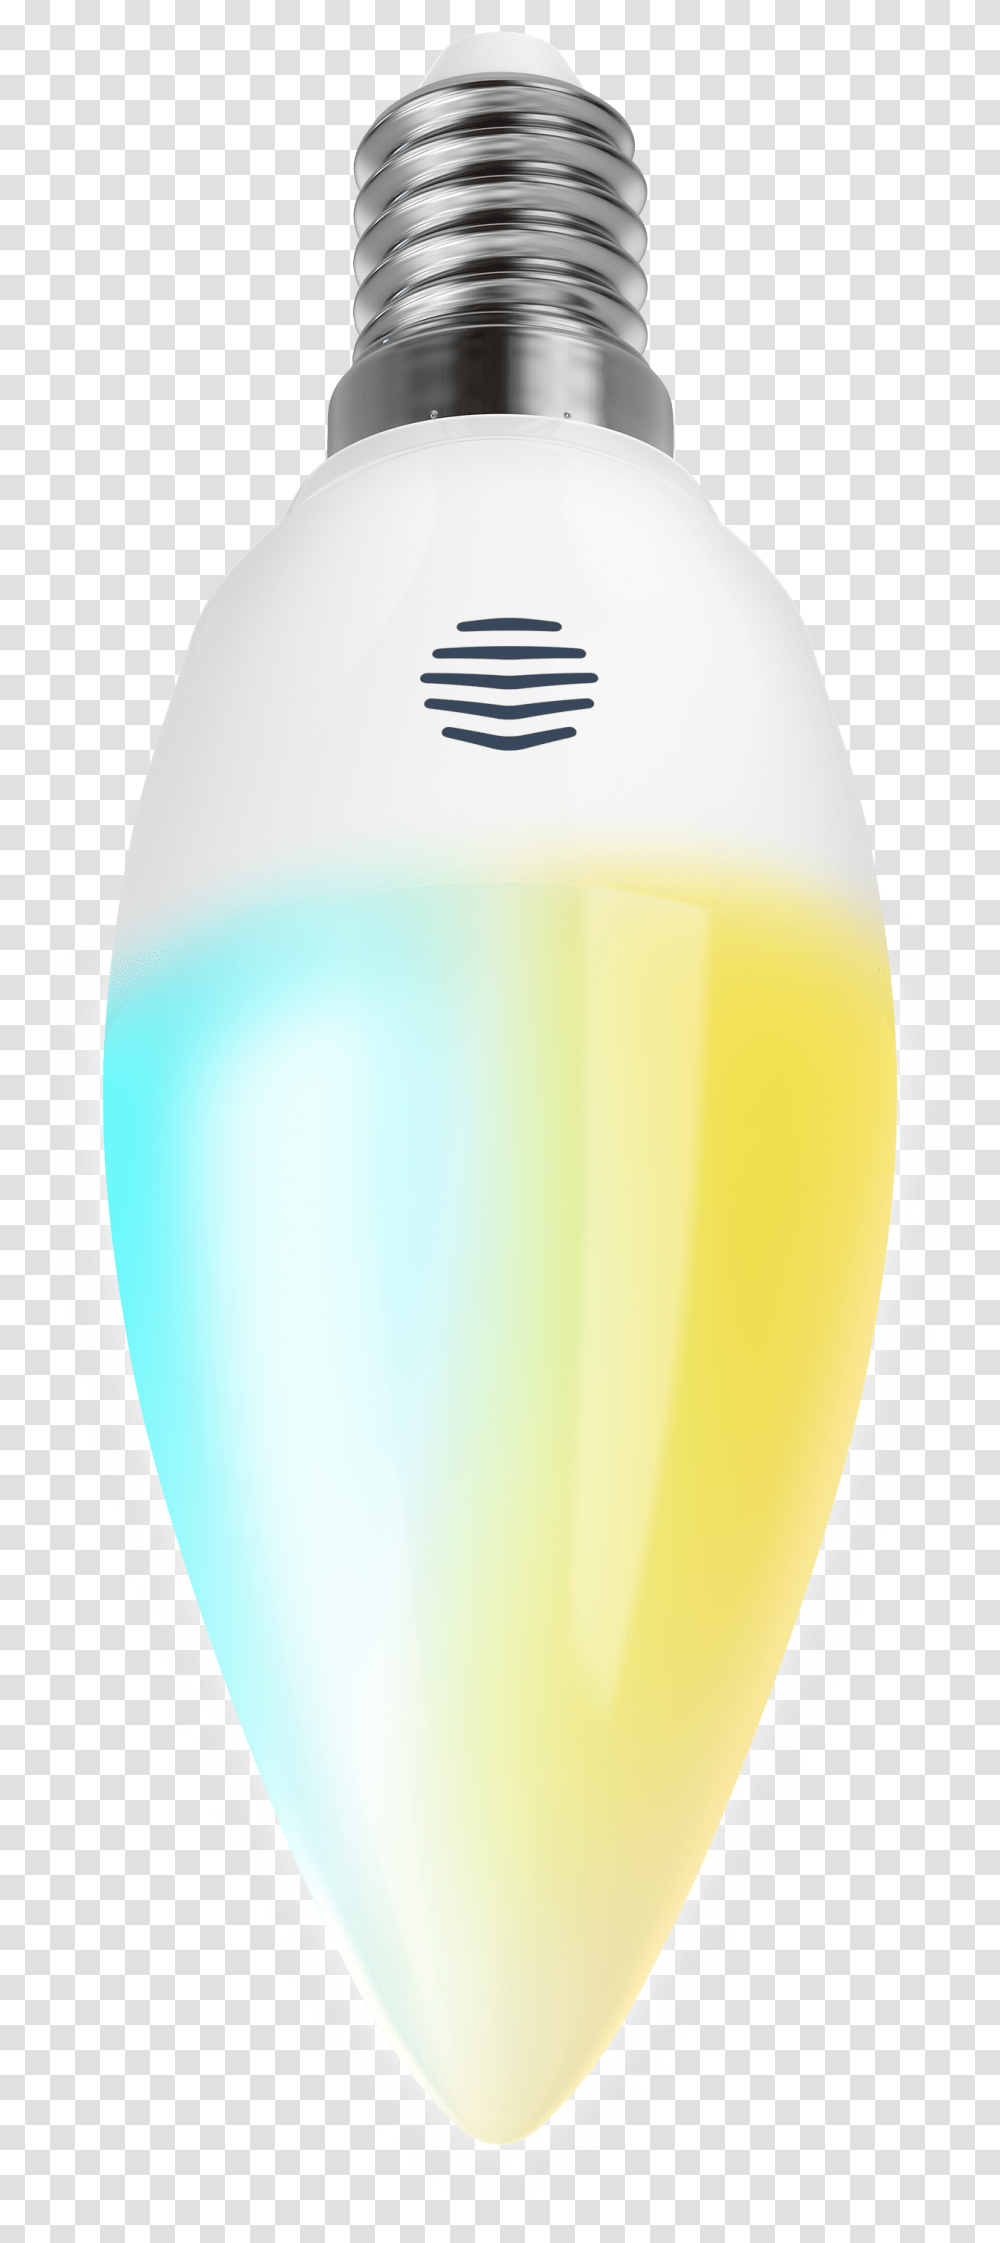 Hive Light Cool To Warm White Smart E14 Bulb Hive Light Bulbs, Sea, Outdoors, Water, Nature Transparent Png